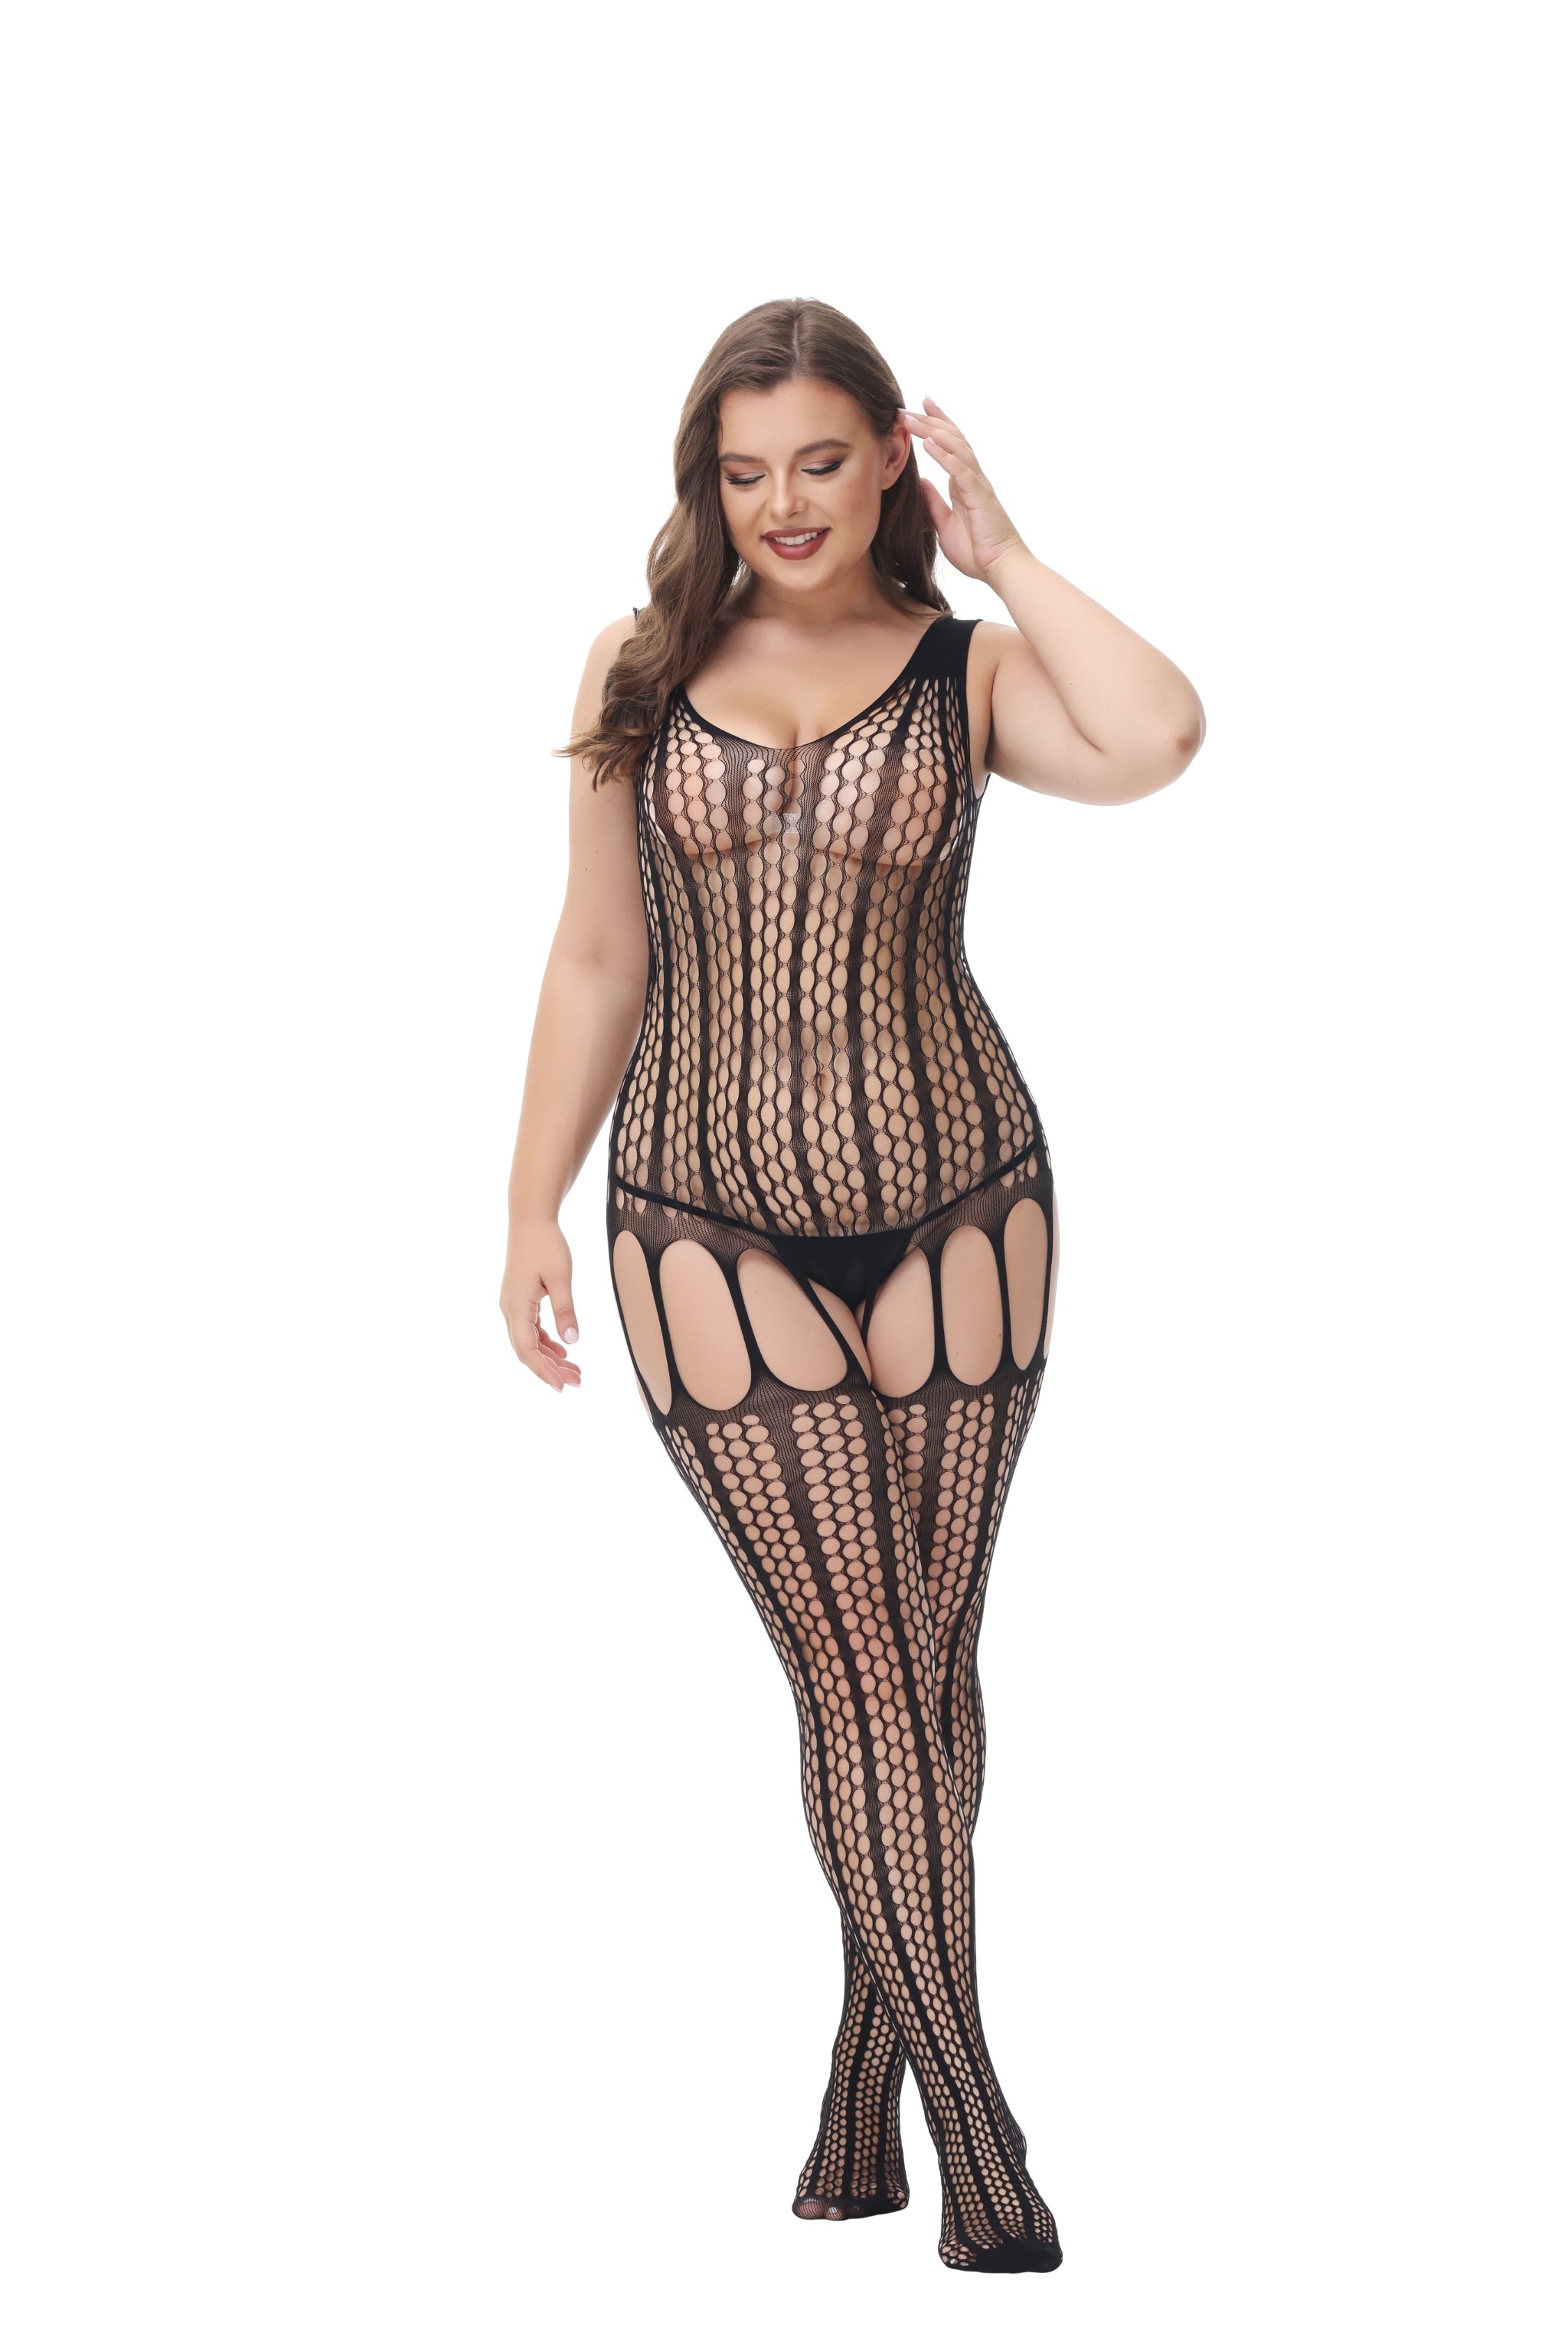 Bodystocking 211851-2 Front